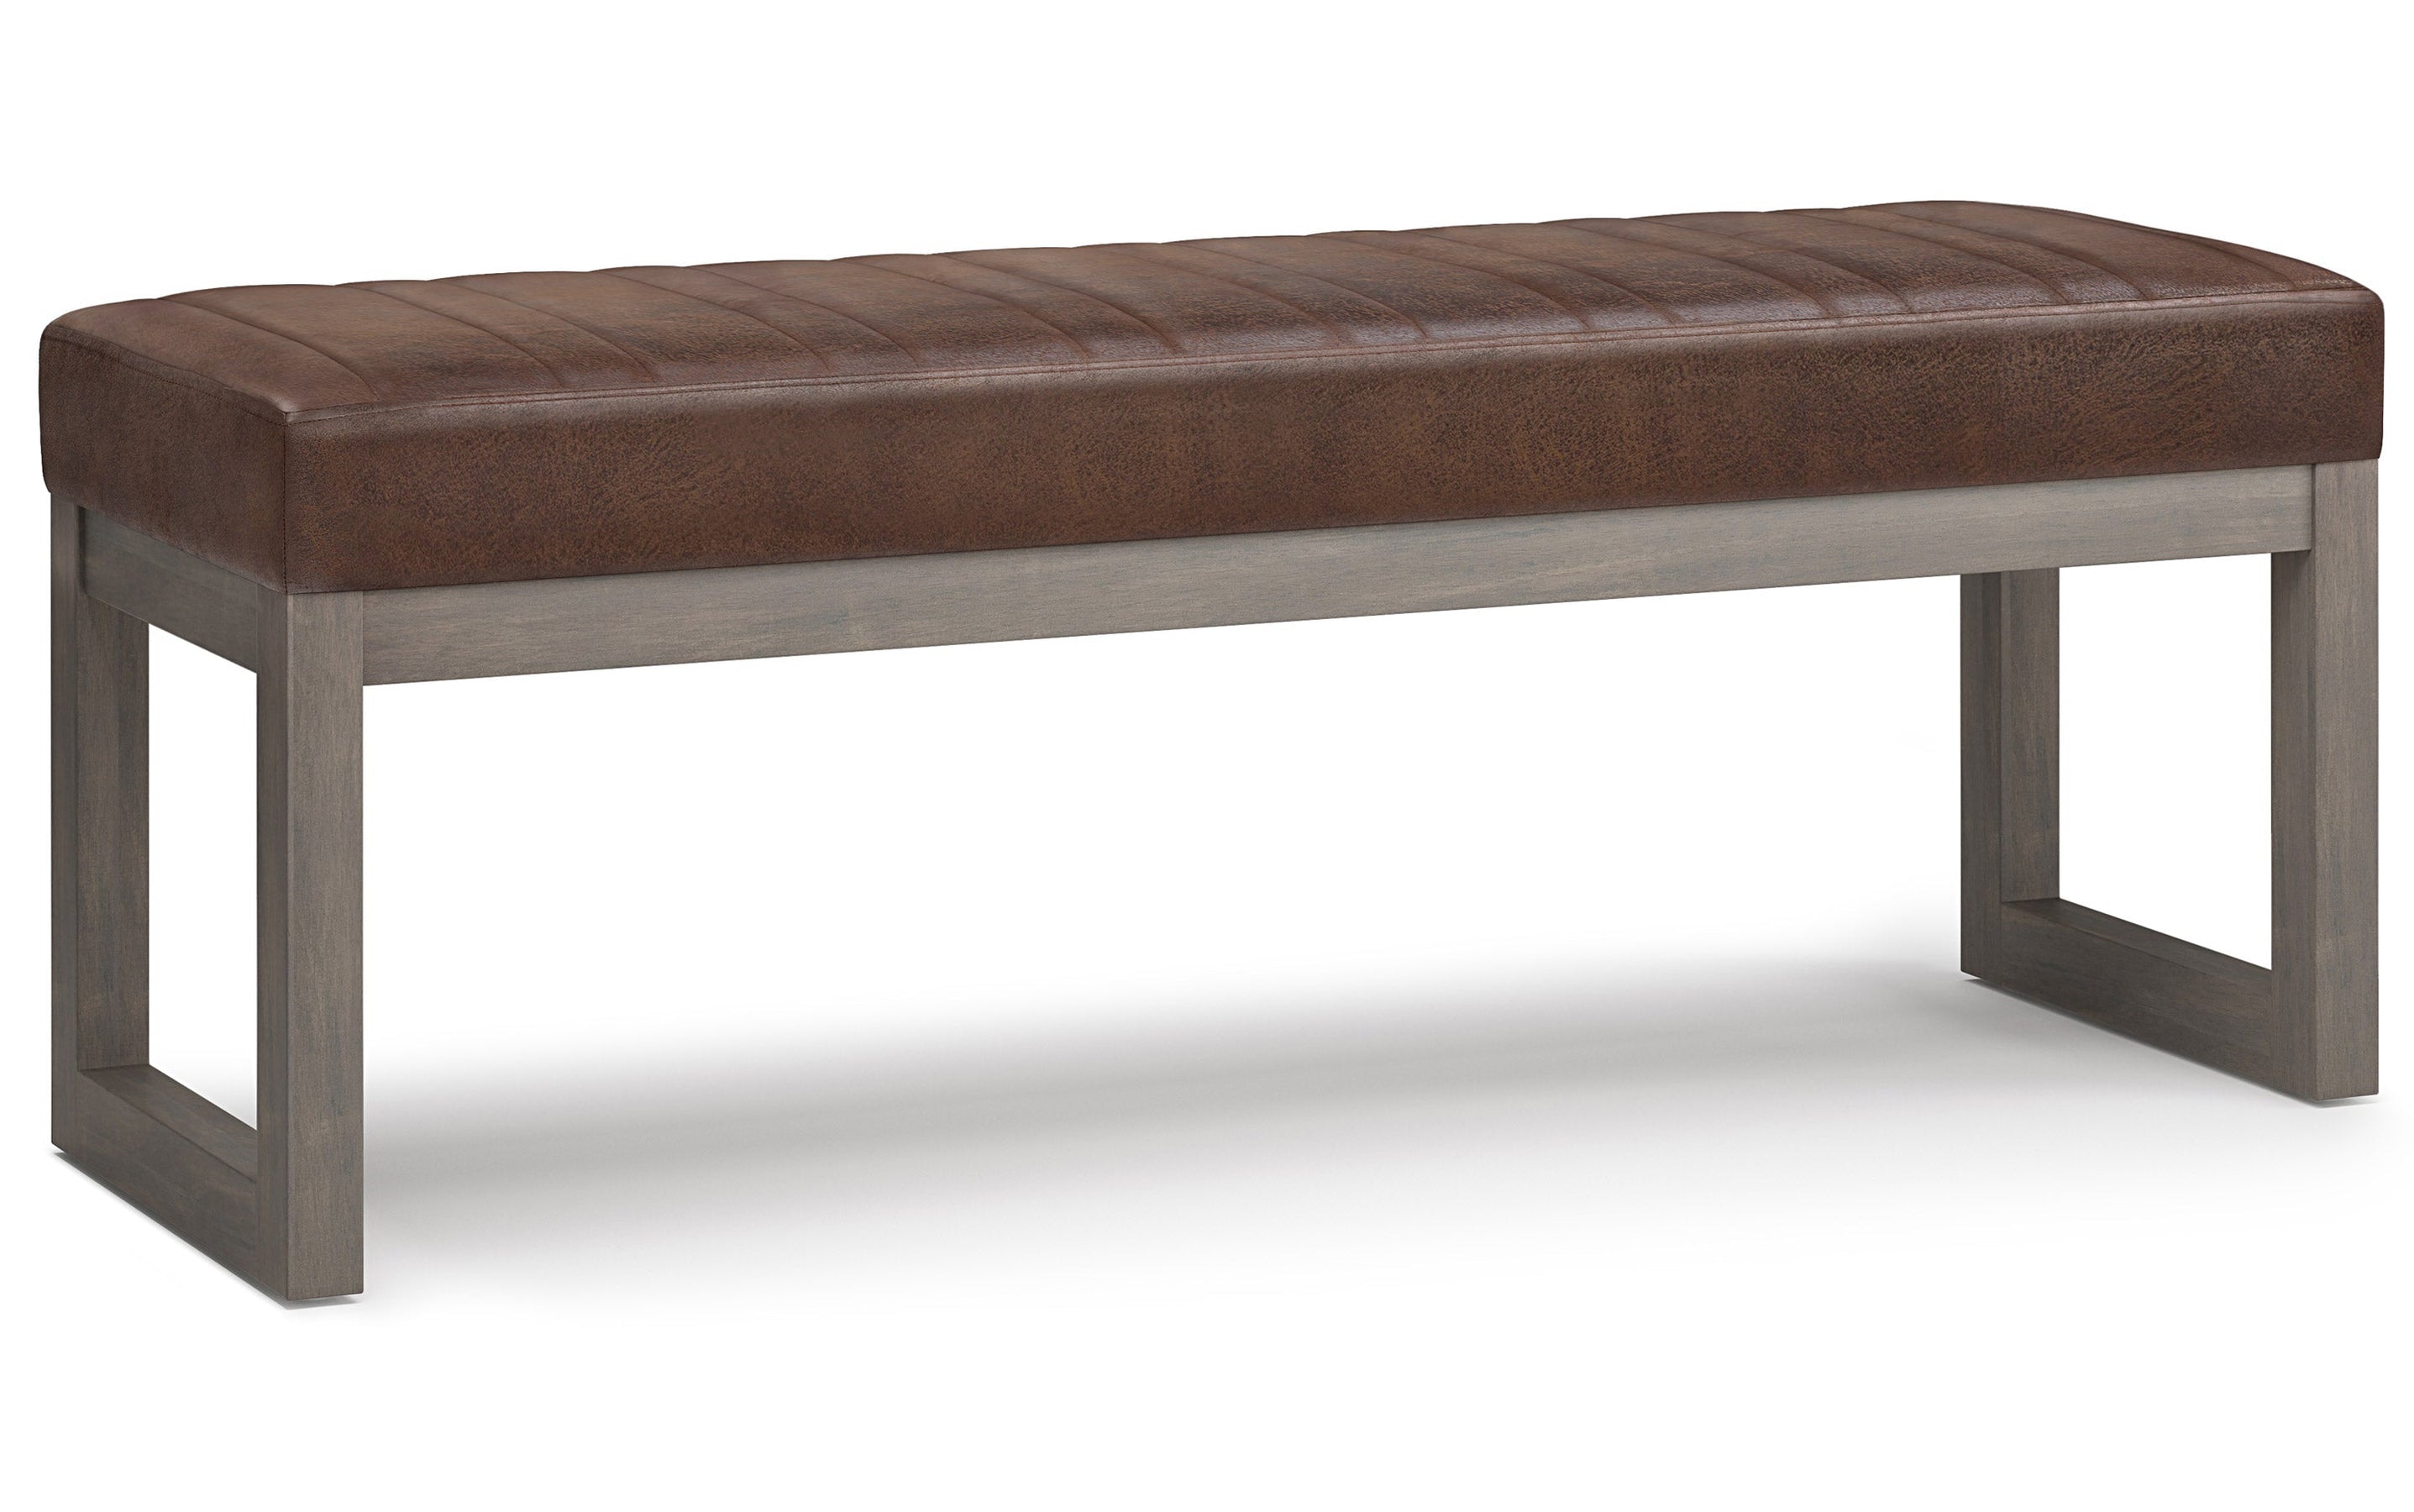 Distressed Chestnut Brown Distressed Vegan Leather | Casey Ottoman Bench